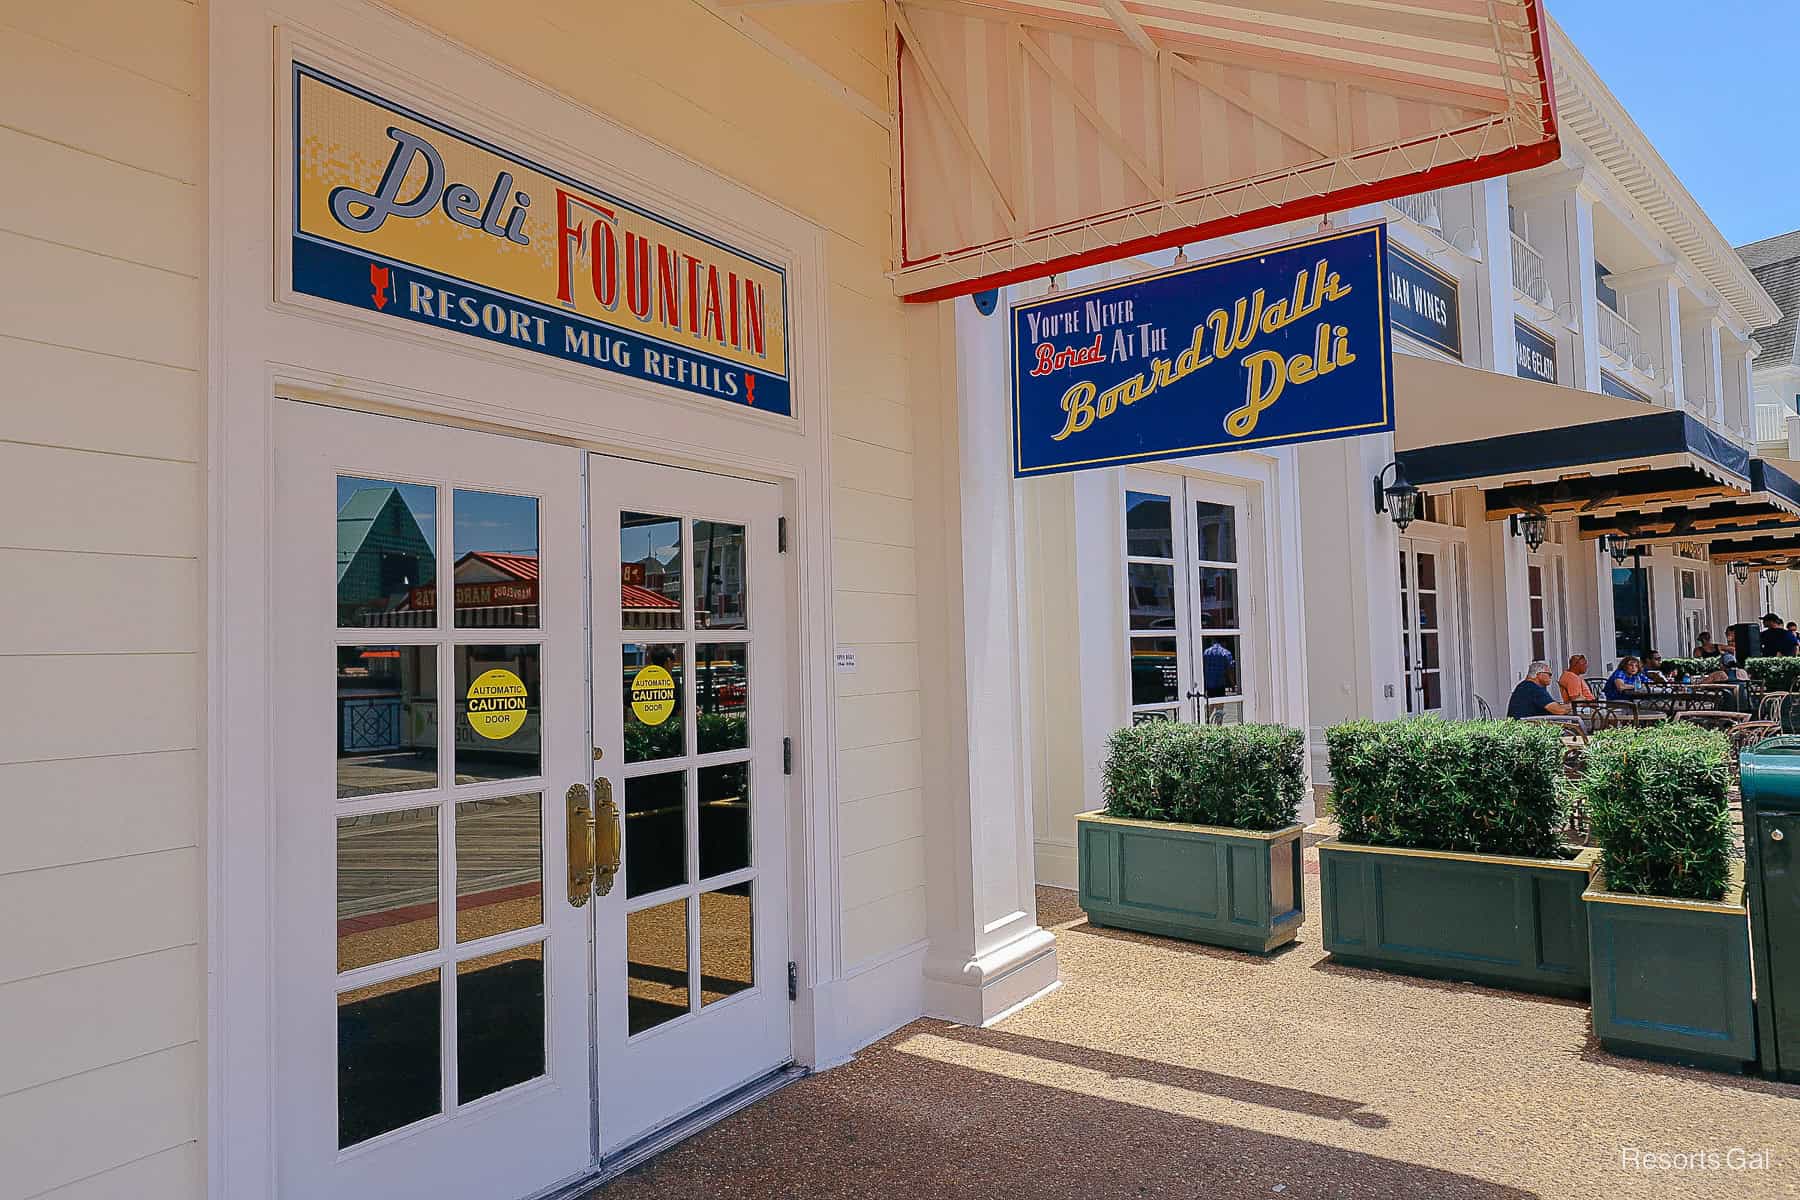 shows the entrance to Boardwalk Deli with a sign that reads "Deli Fountain Resort Mug Refills"